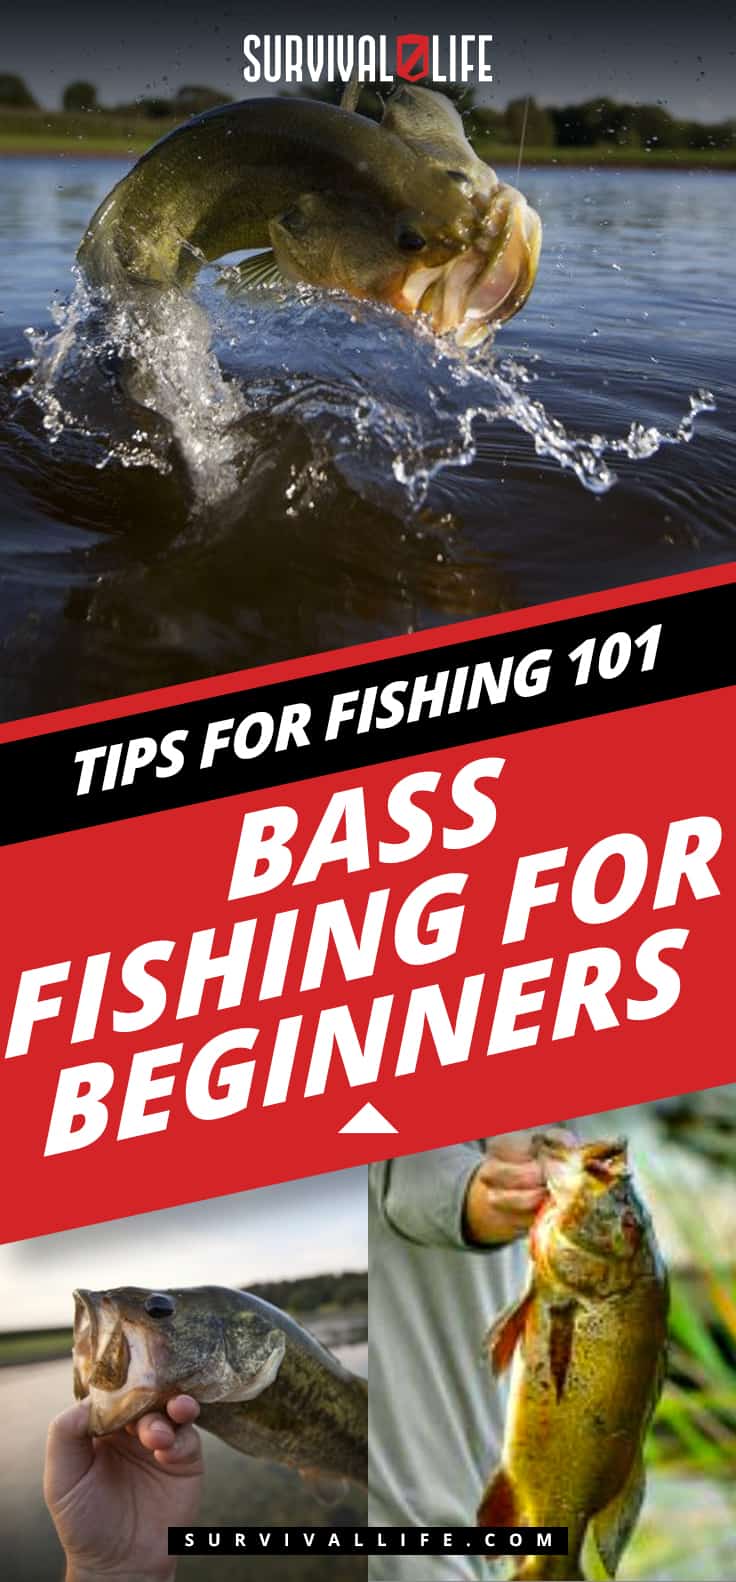 Bass Fishing for Beginners | Tips for Fishing 101